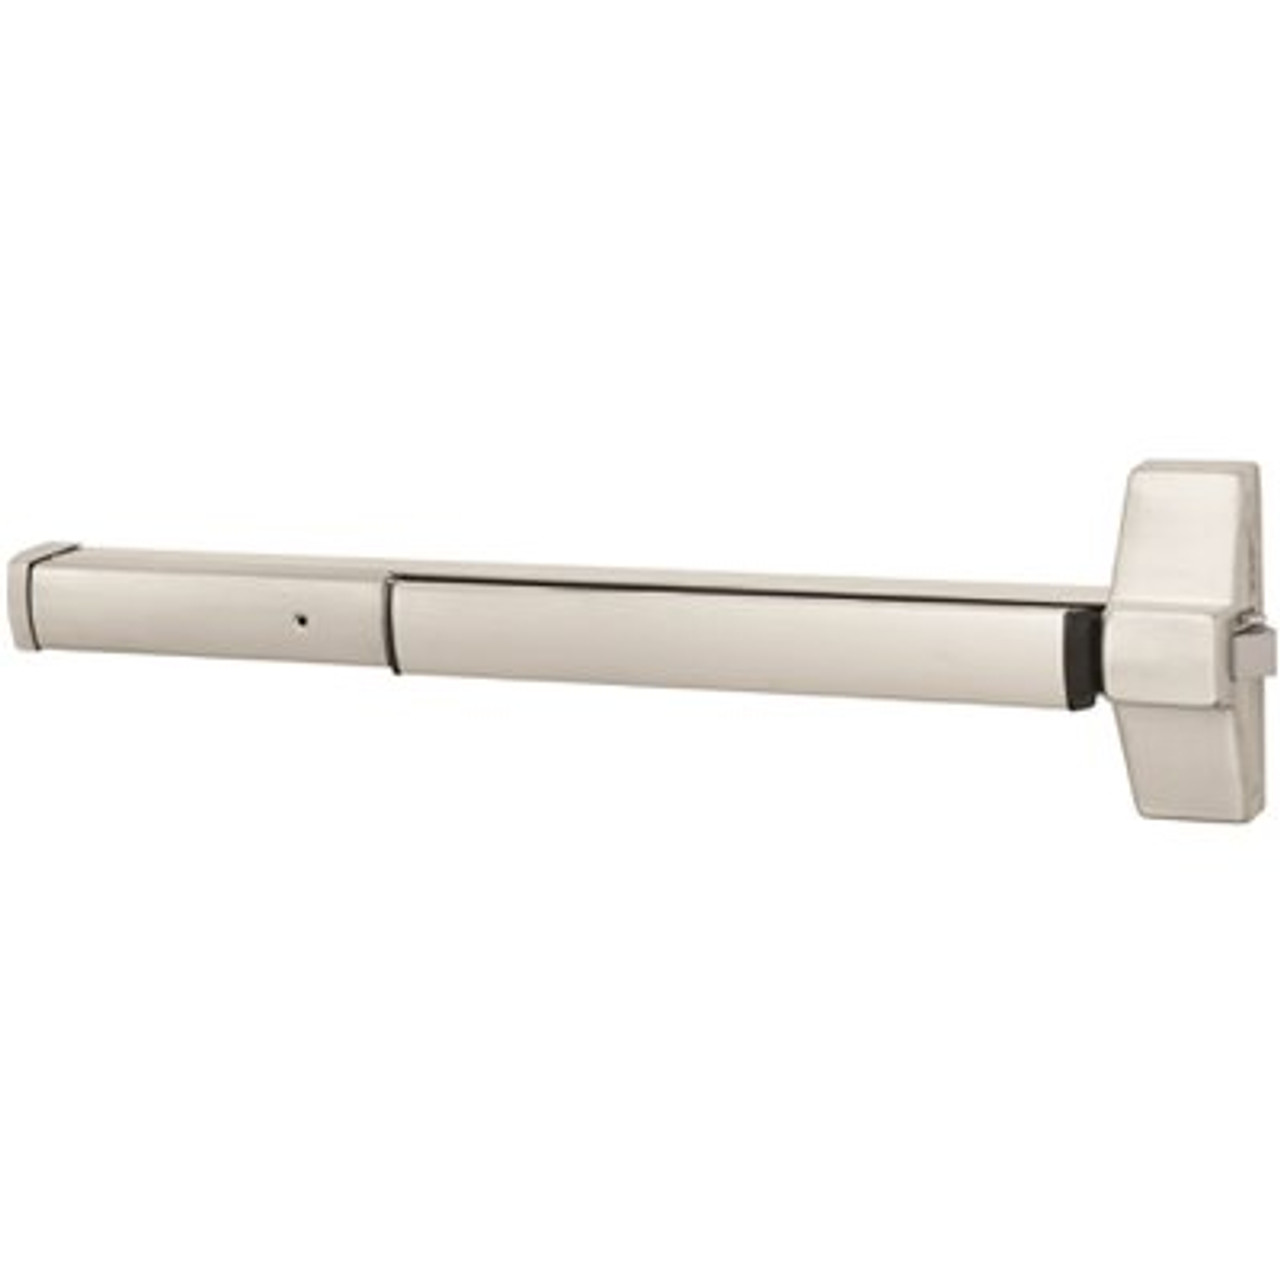 Corbin Russwin Ed5000 Series Grade 1,36 In. Stainless Steel Finish Non-Handed Surface Exit Device, Exit Only - 316650783